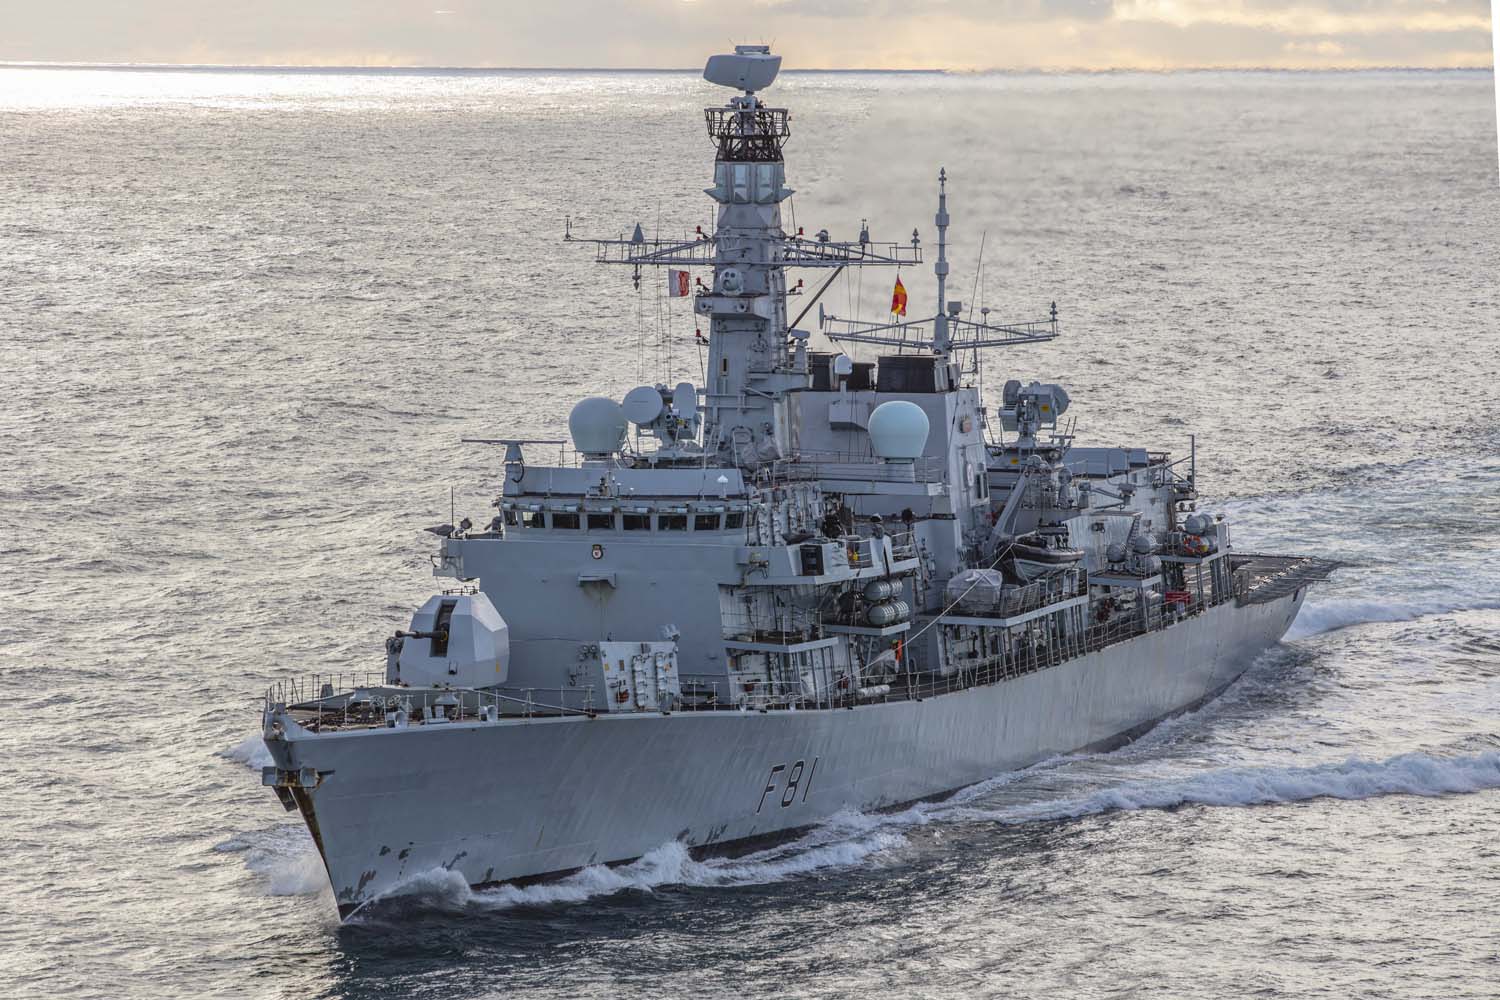 HMS Sutherland has been shadowing seven Russian ships alongside eight other Royal Navy vessels in UK waters